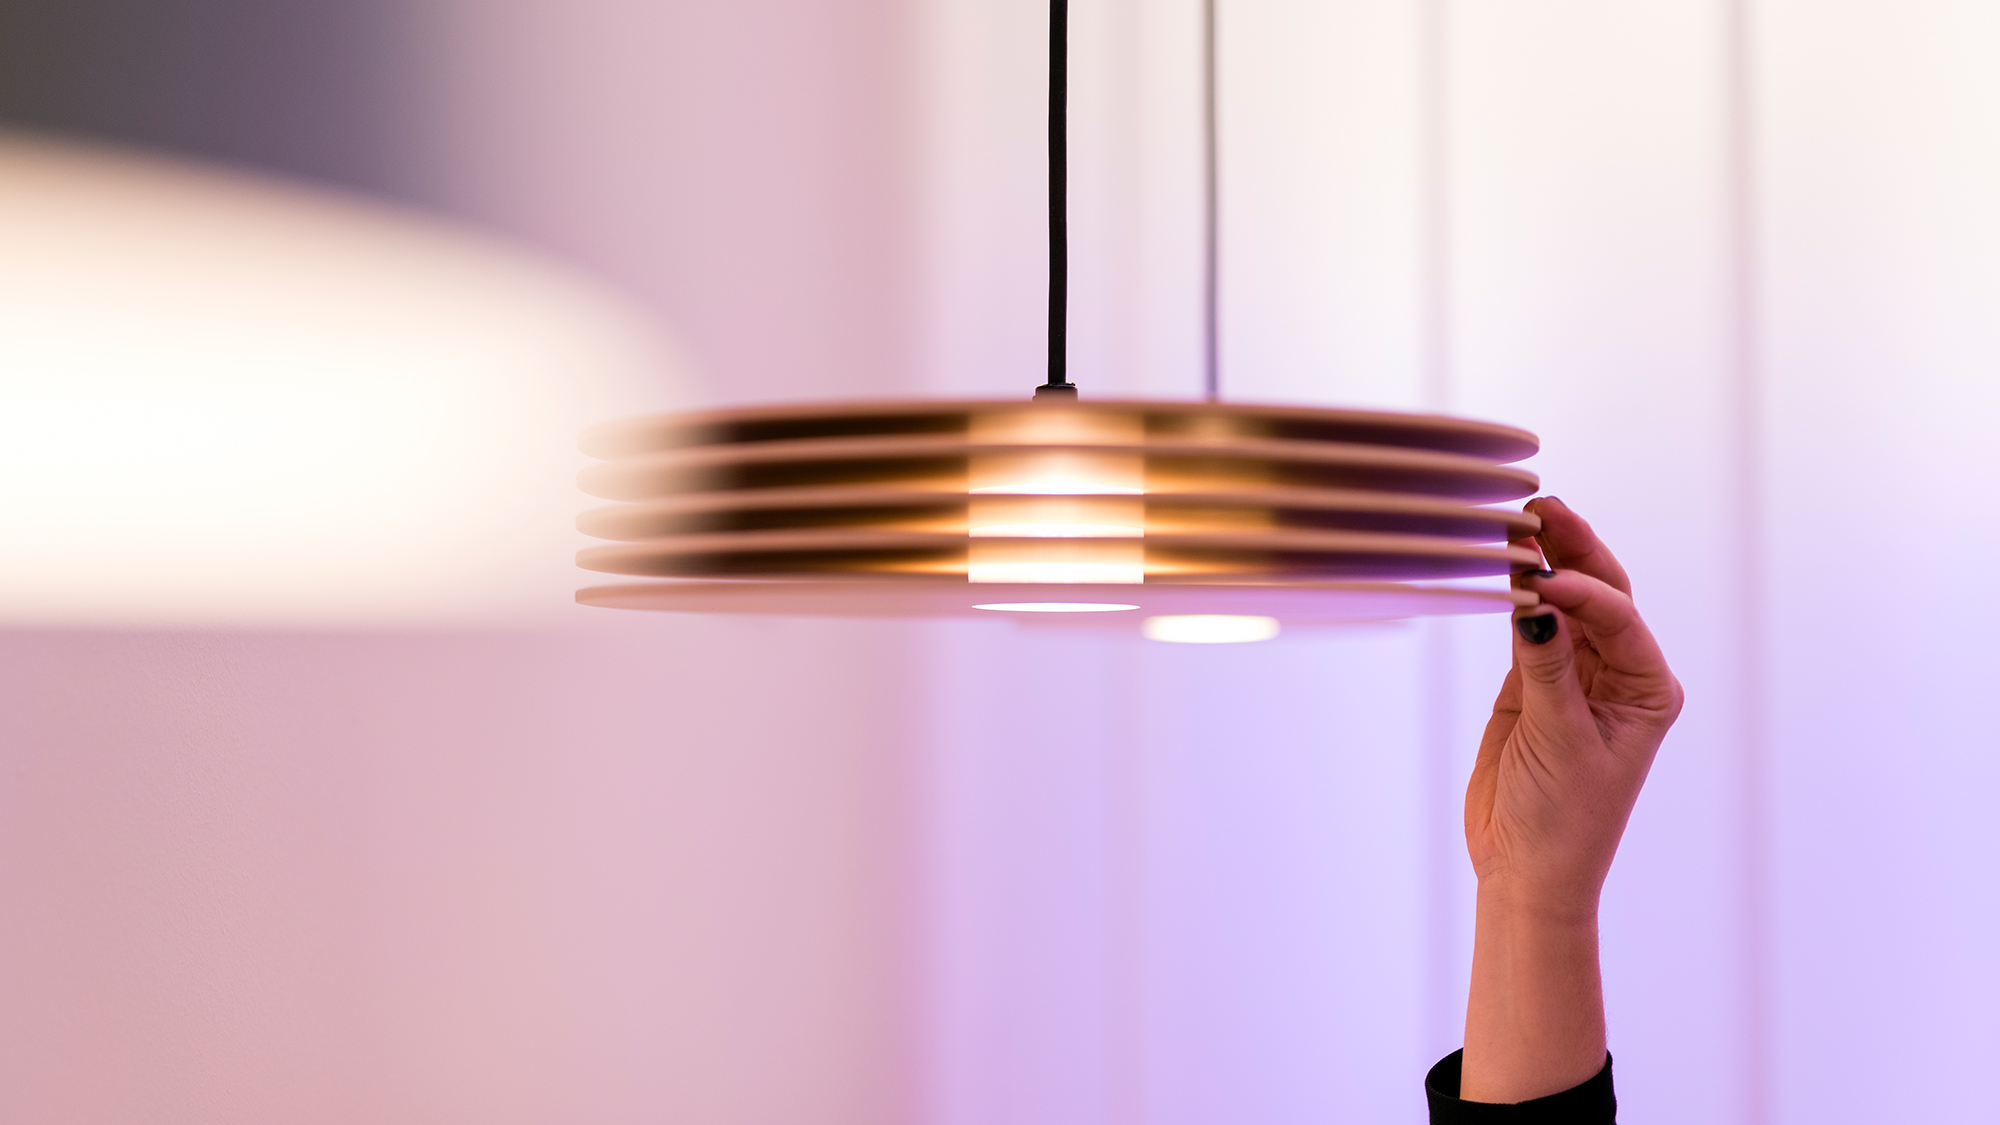 A woman is touching a hanging lamp